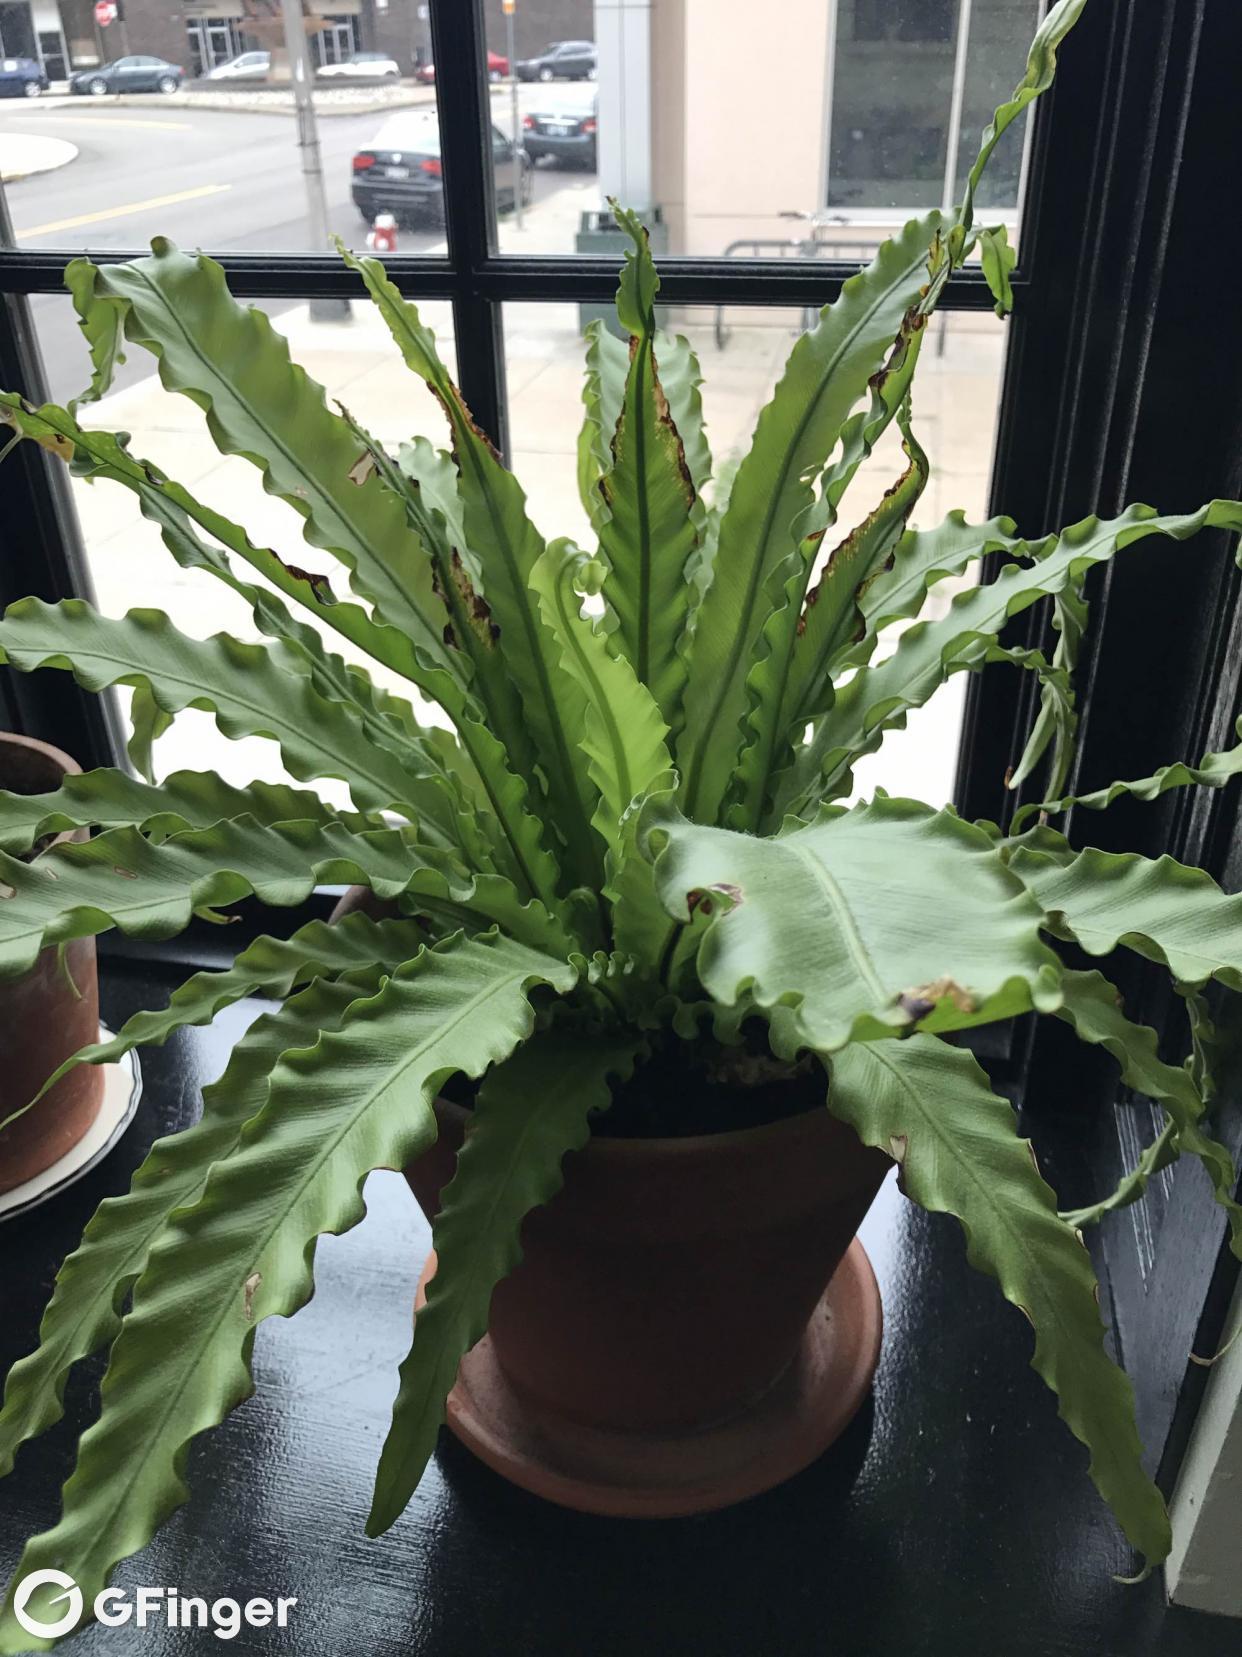 What plant is this?